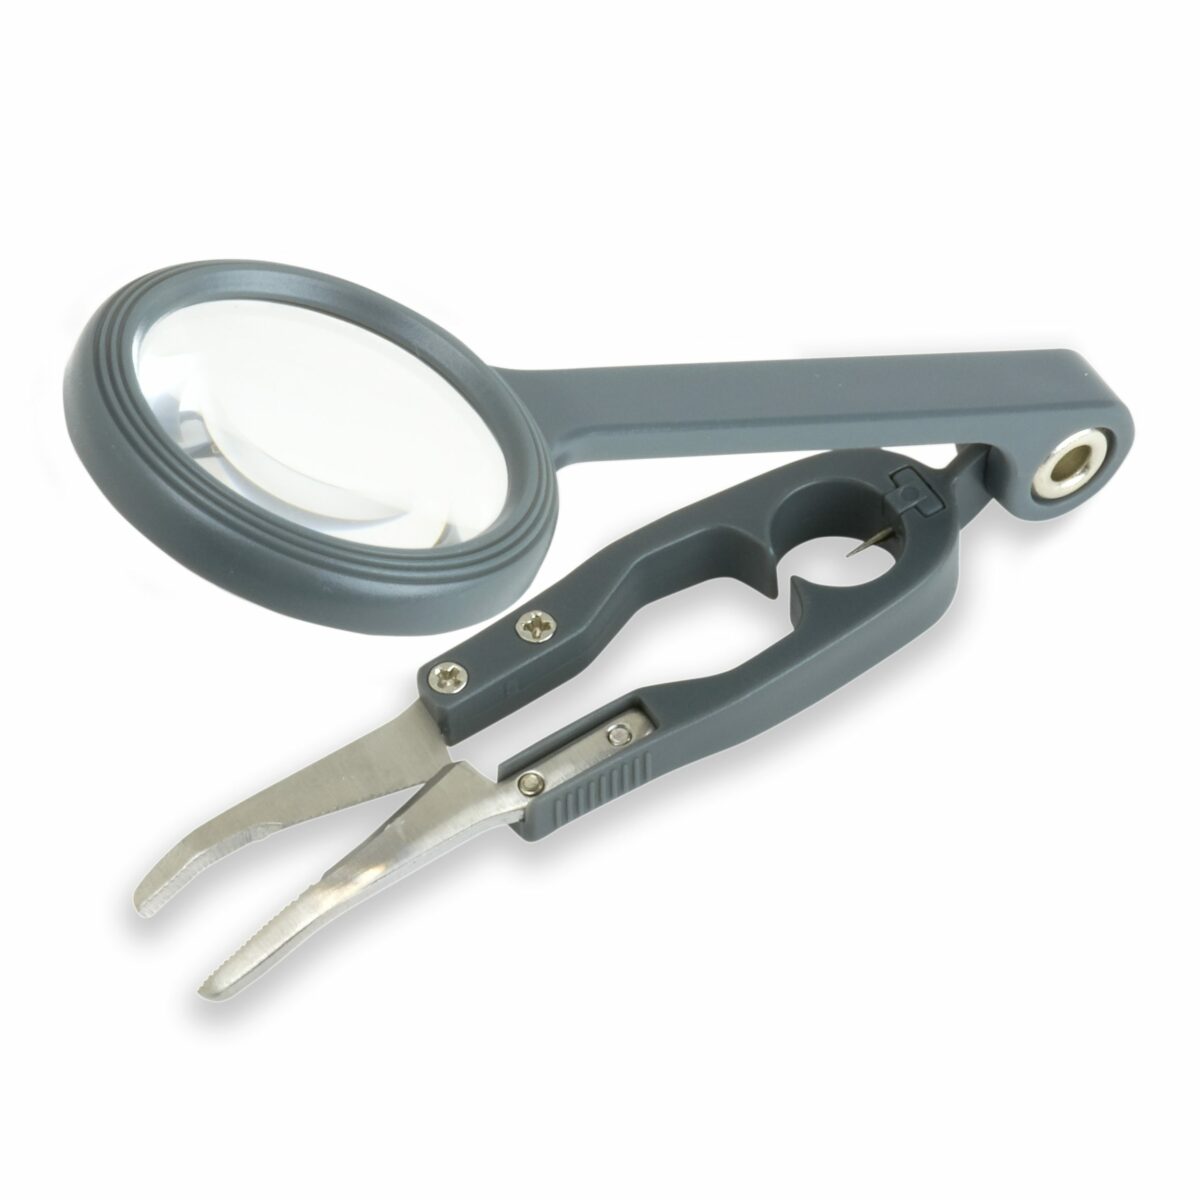 Fish’n Grip™ 4.5x Power Magnifier Fishing Tool with Precision Tweezers